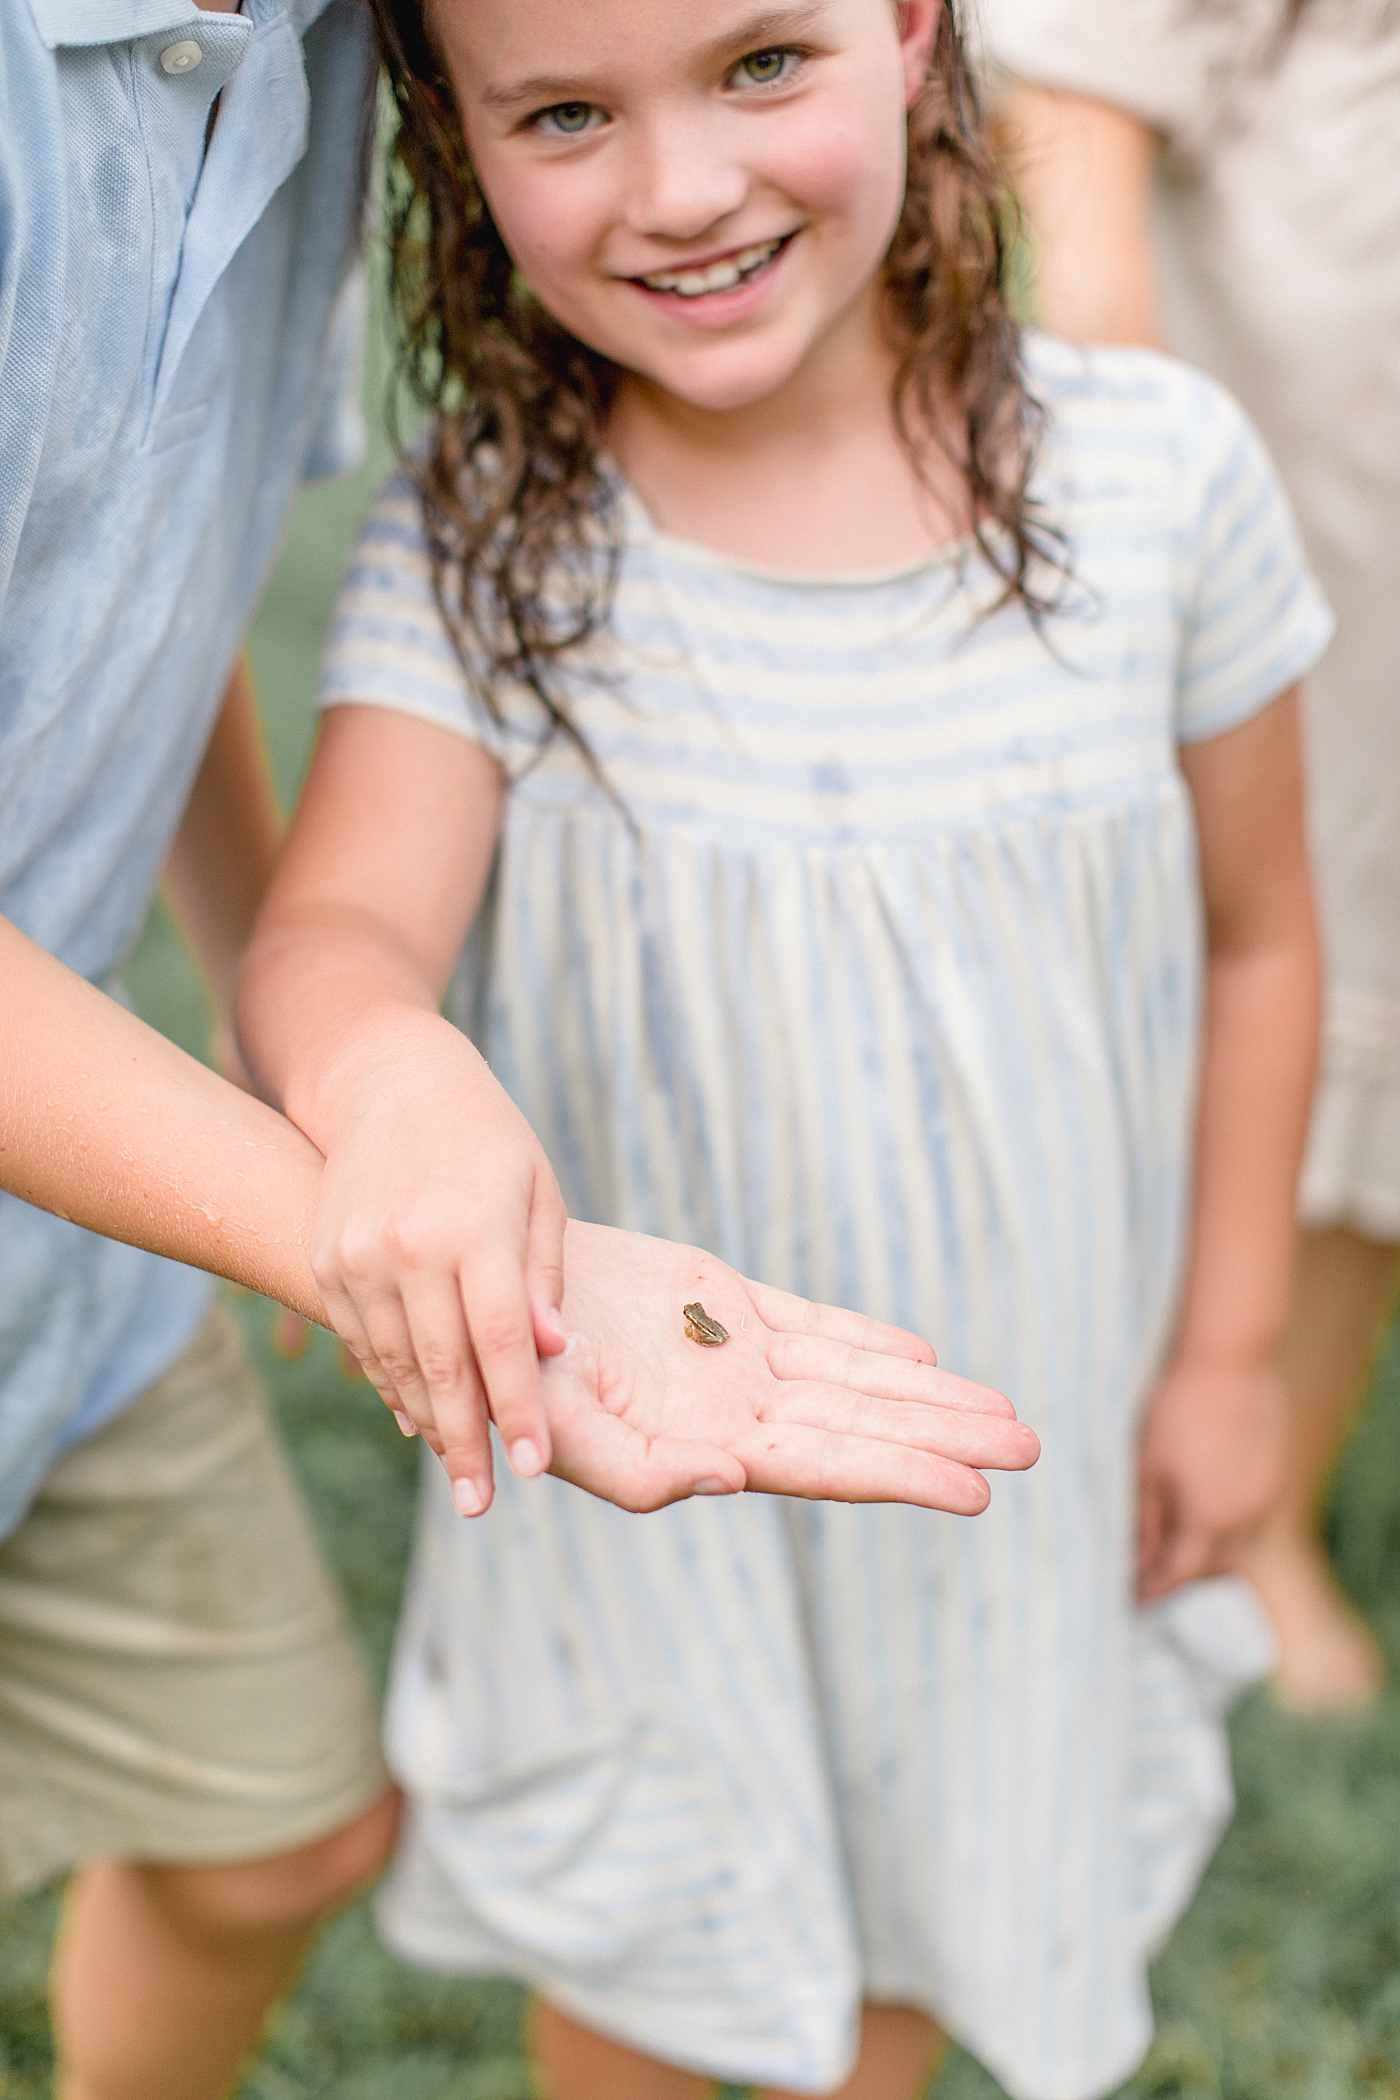 Family photoshoot in the rain. Daughter catches a small frog. Photo by Brittany Elise Photography.